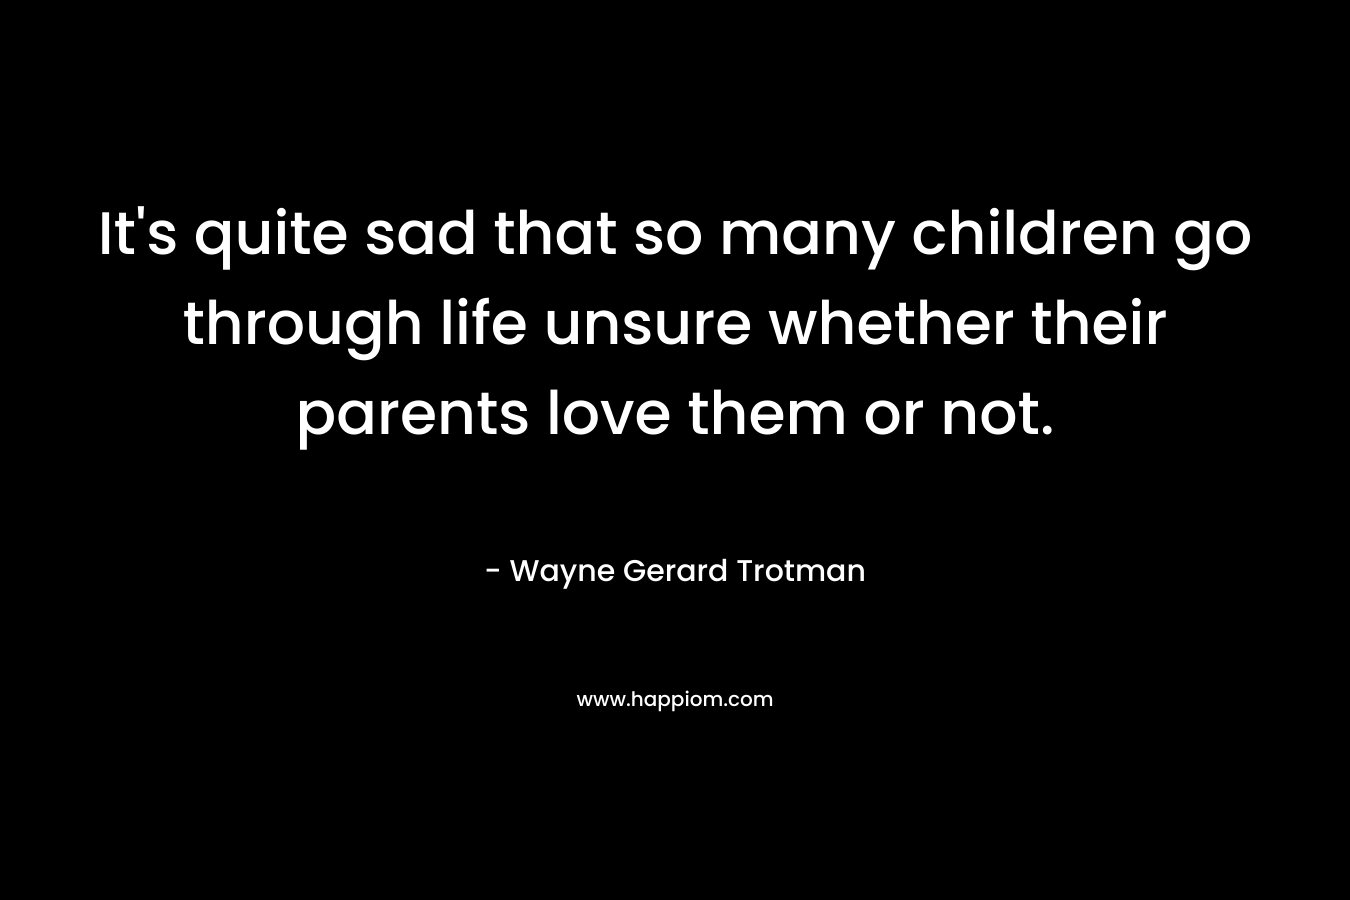 It's quite sad that so many children go through life unsure whether their parents love them or not.